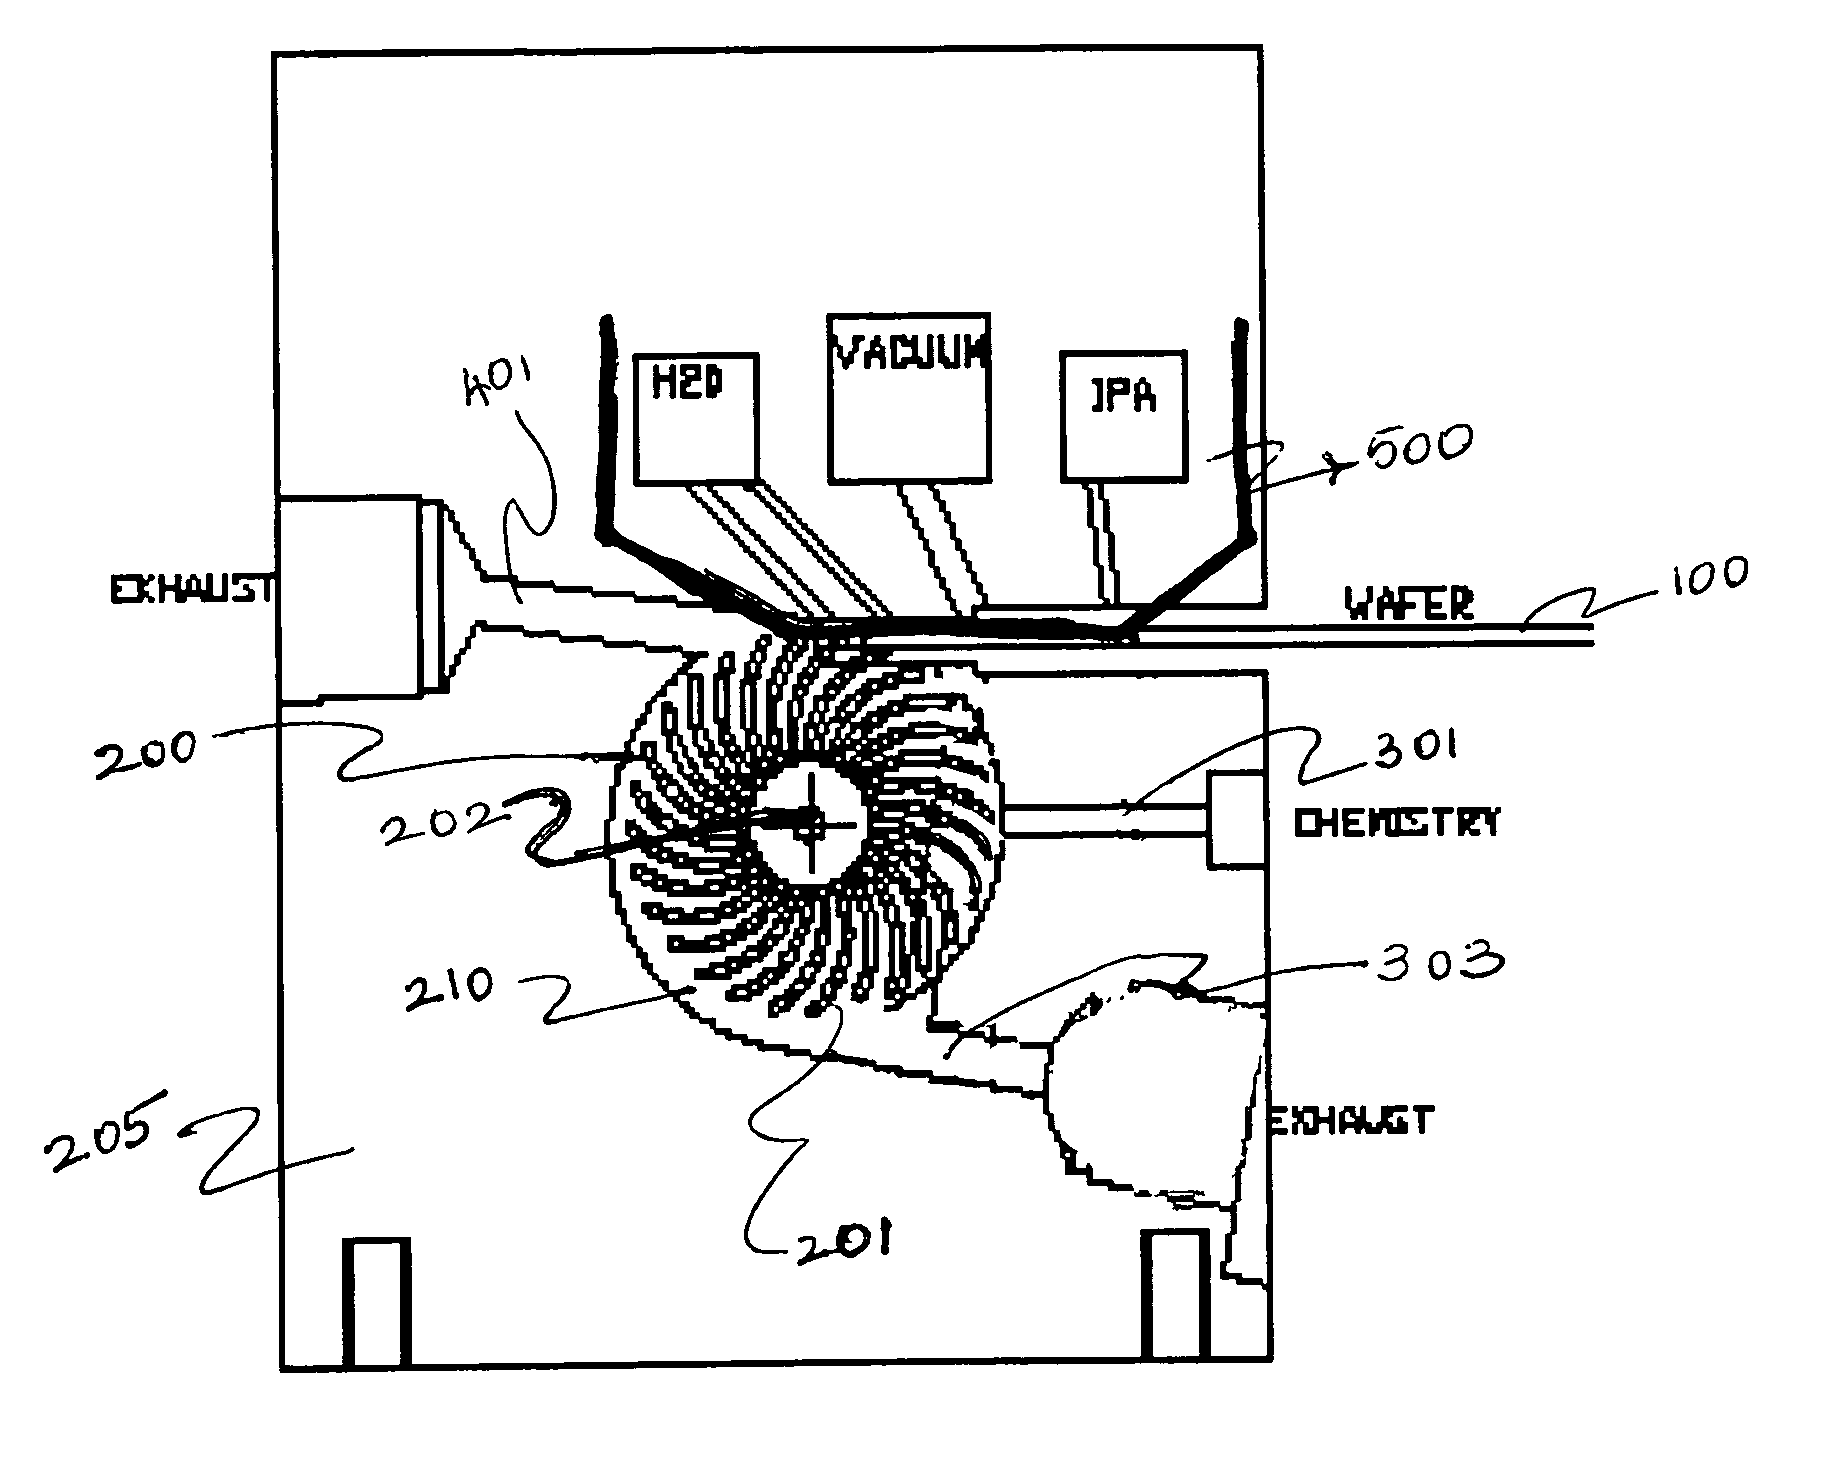 Apparatus for isolated bevel edge clean and method for using the same